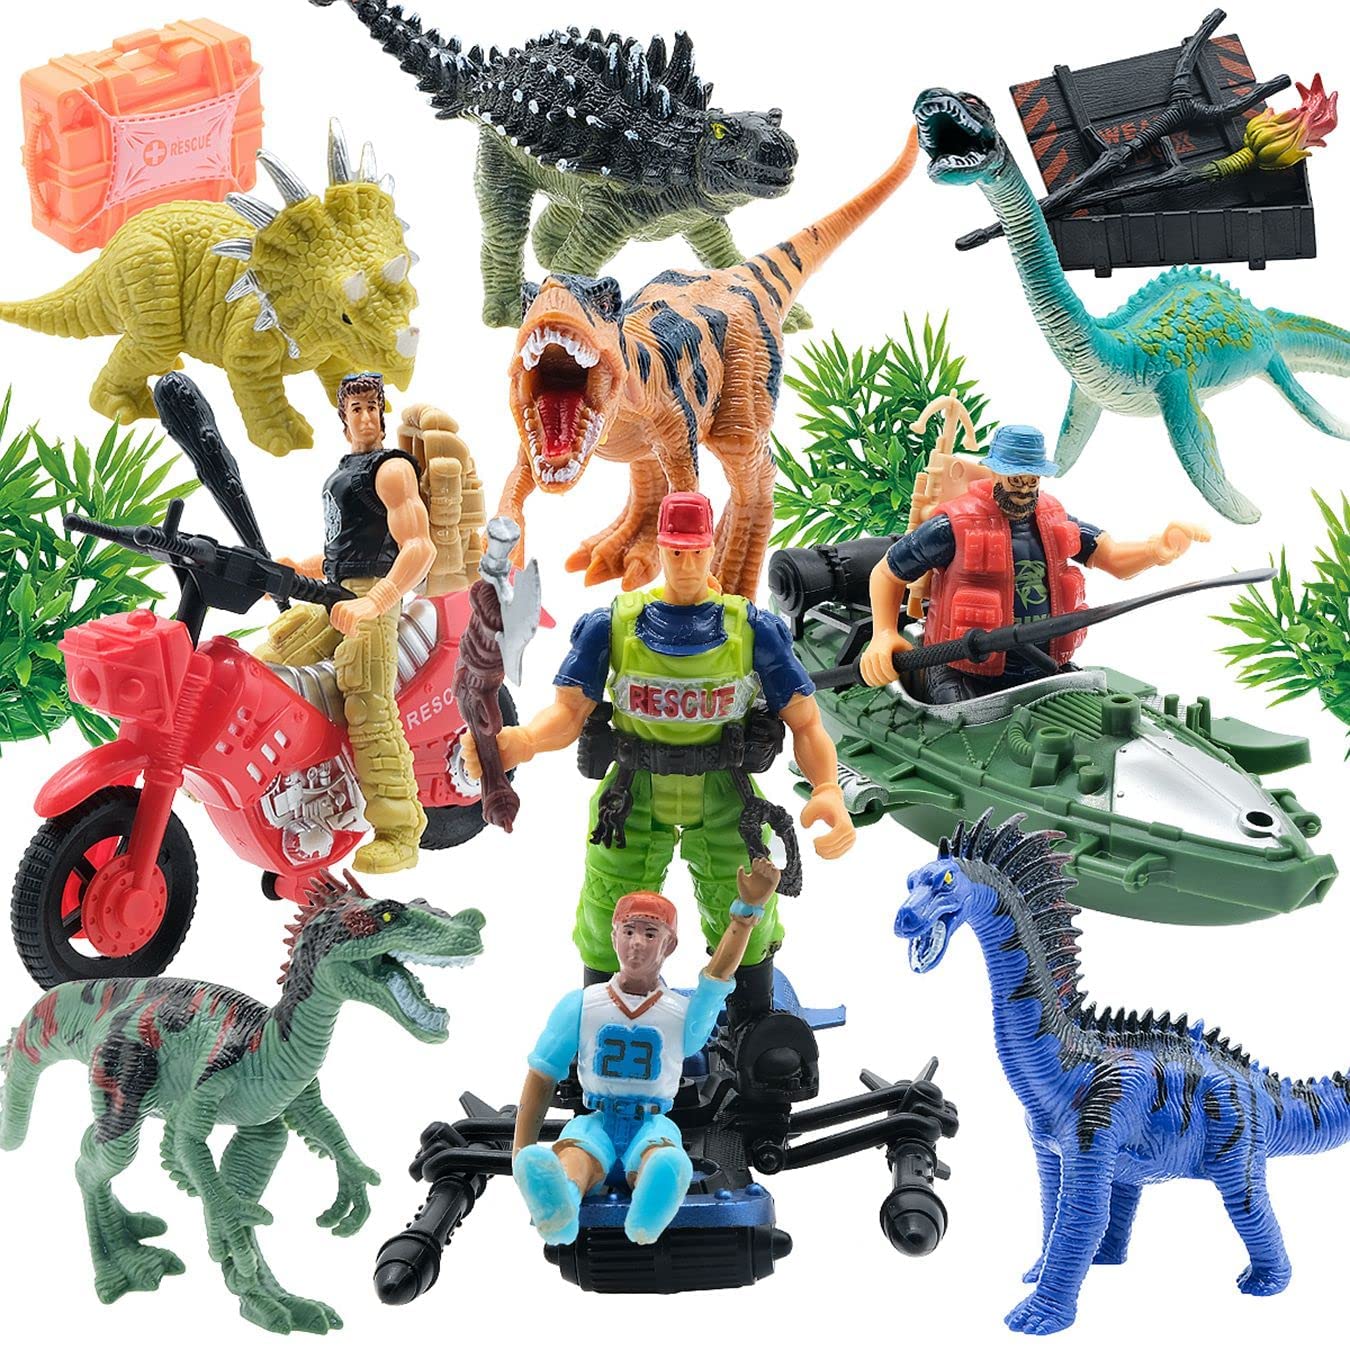 Dinosaur Toys with Action Figures for $6.99(50% off)